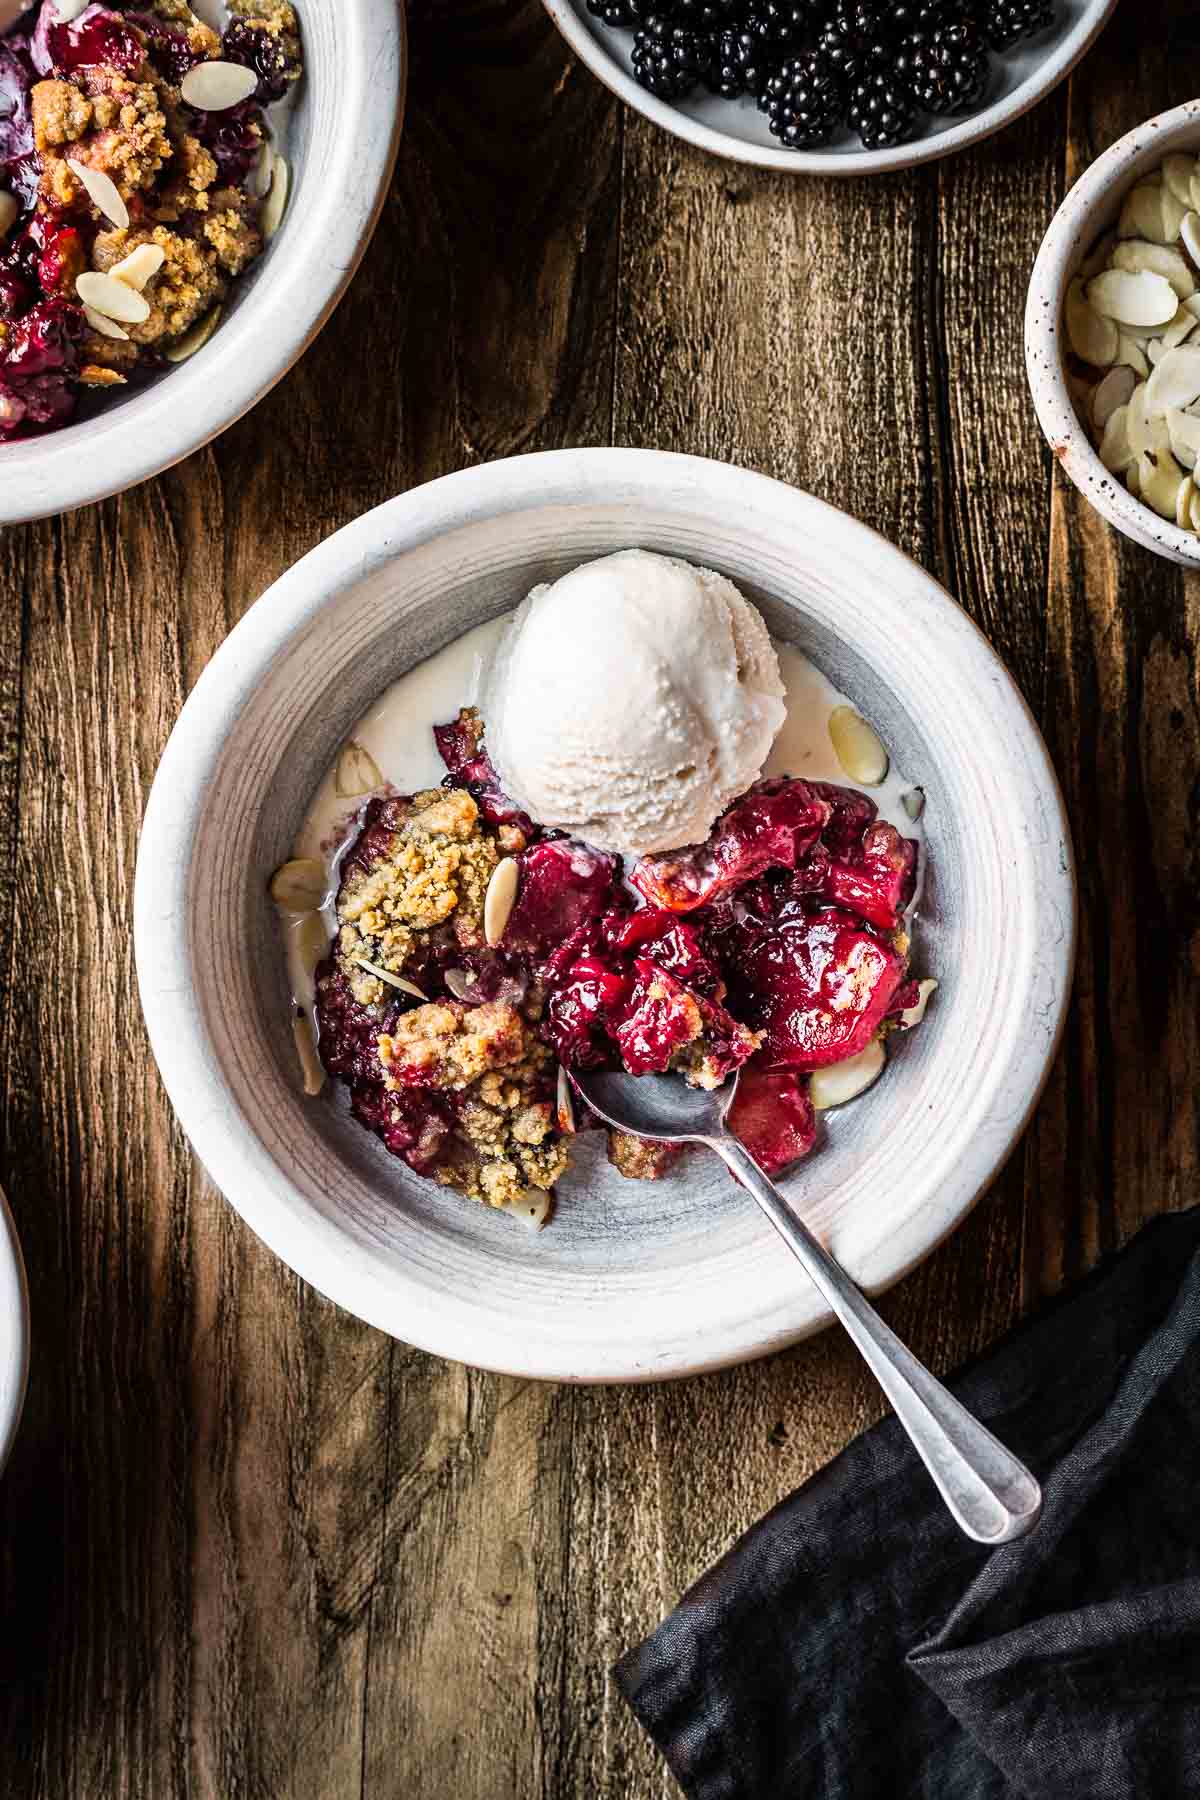 A serving of apple and blackberry crumble in a white ceramic bowl with a spoon and a scoop of ice cream on the side. The bowl rests on a rustic wooden table.